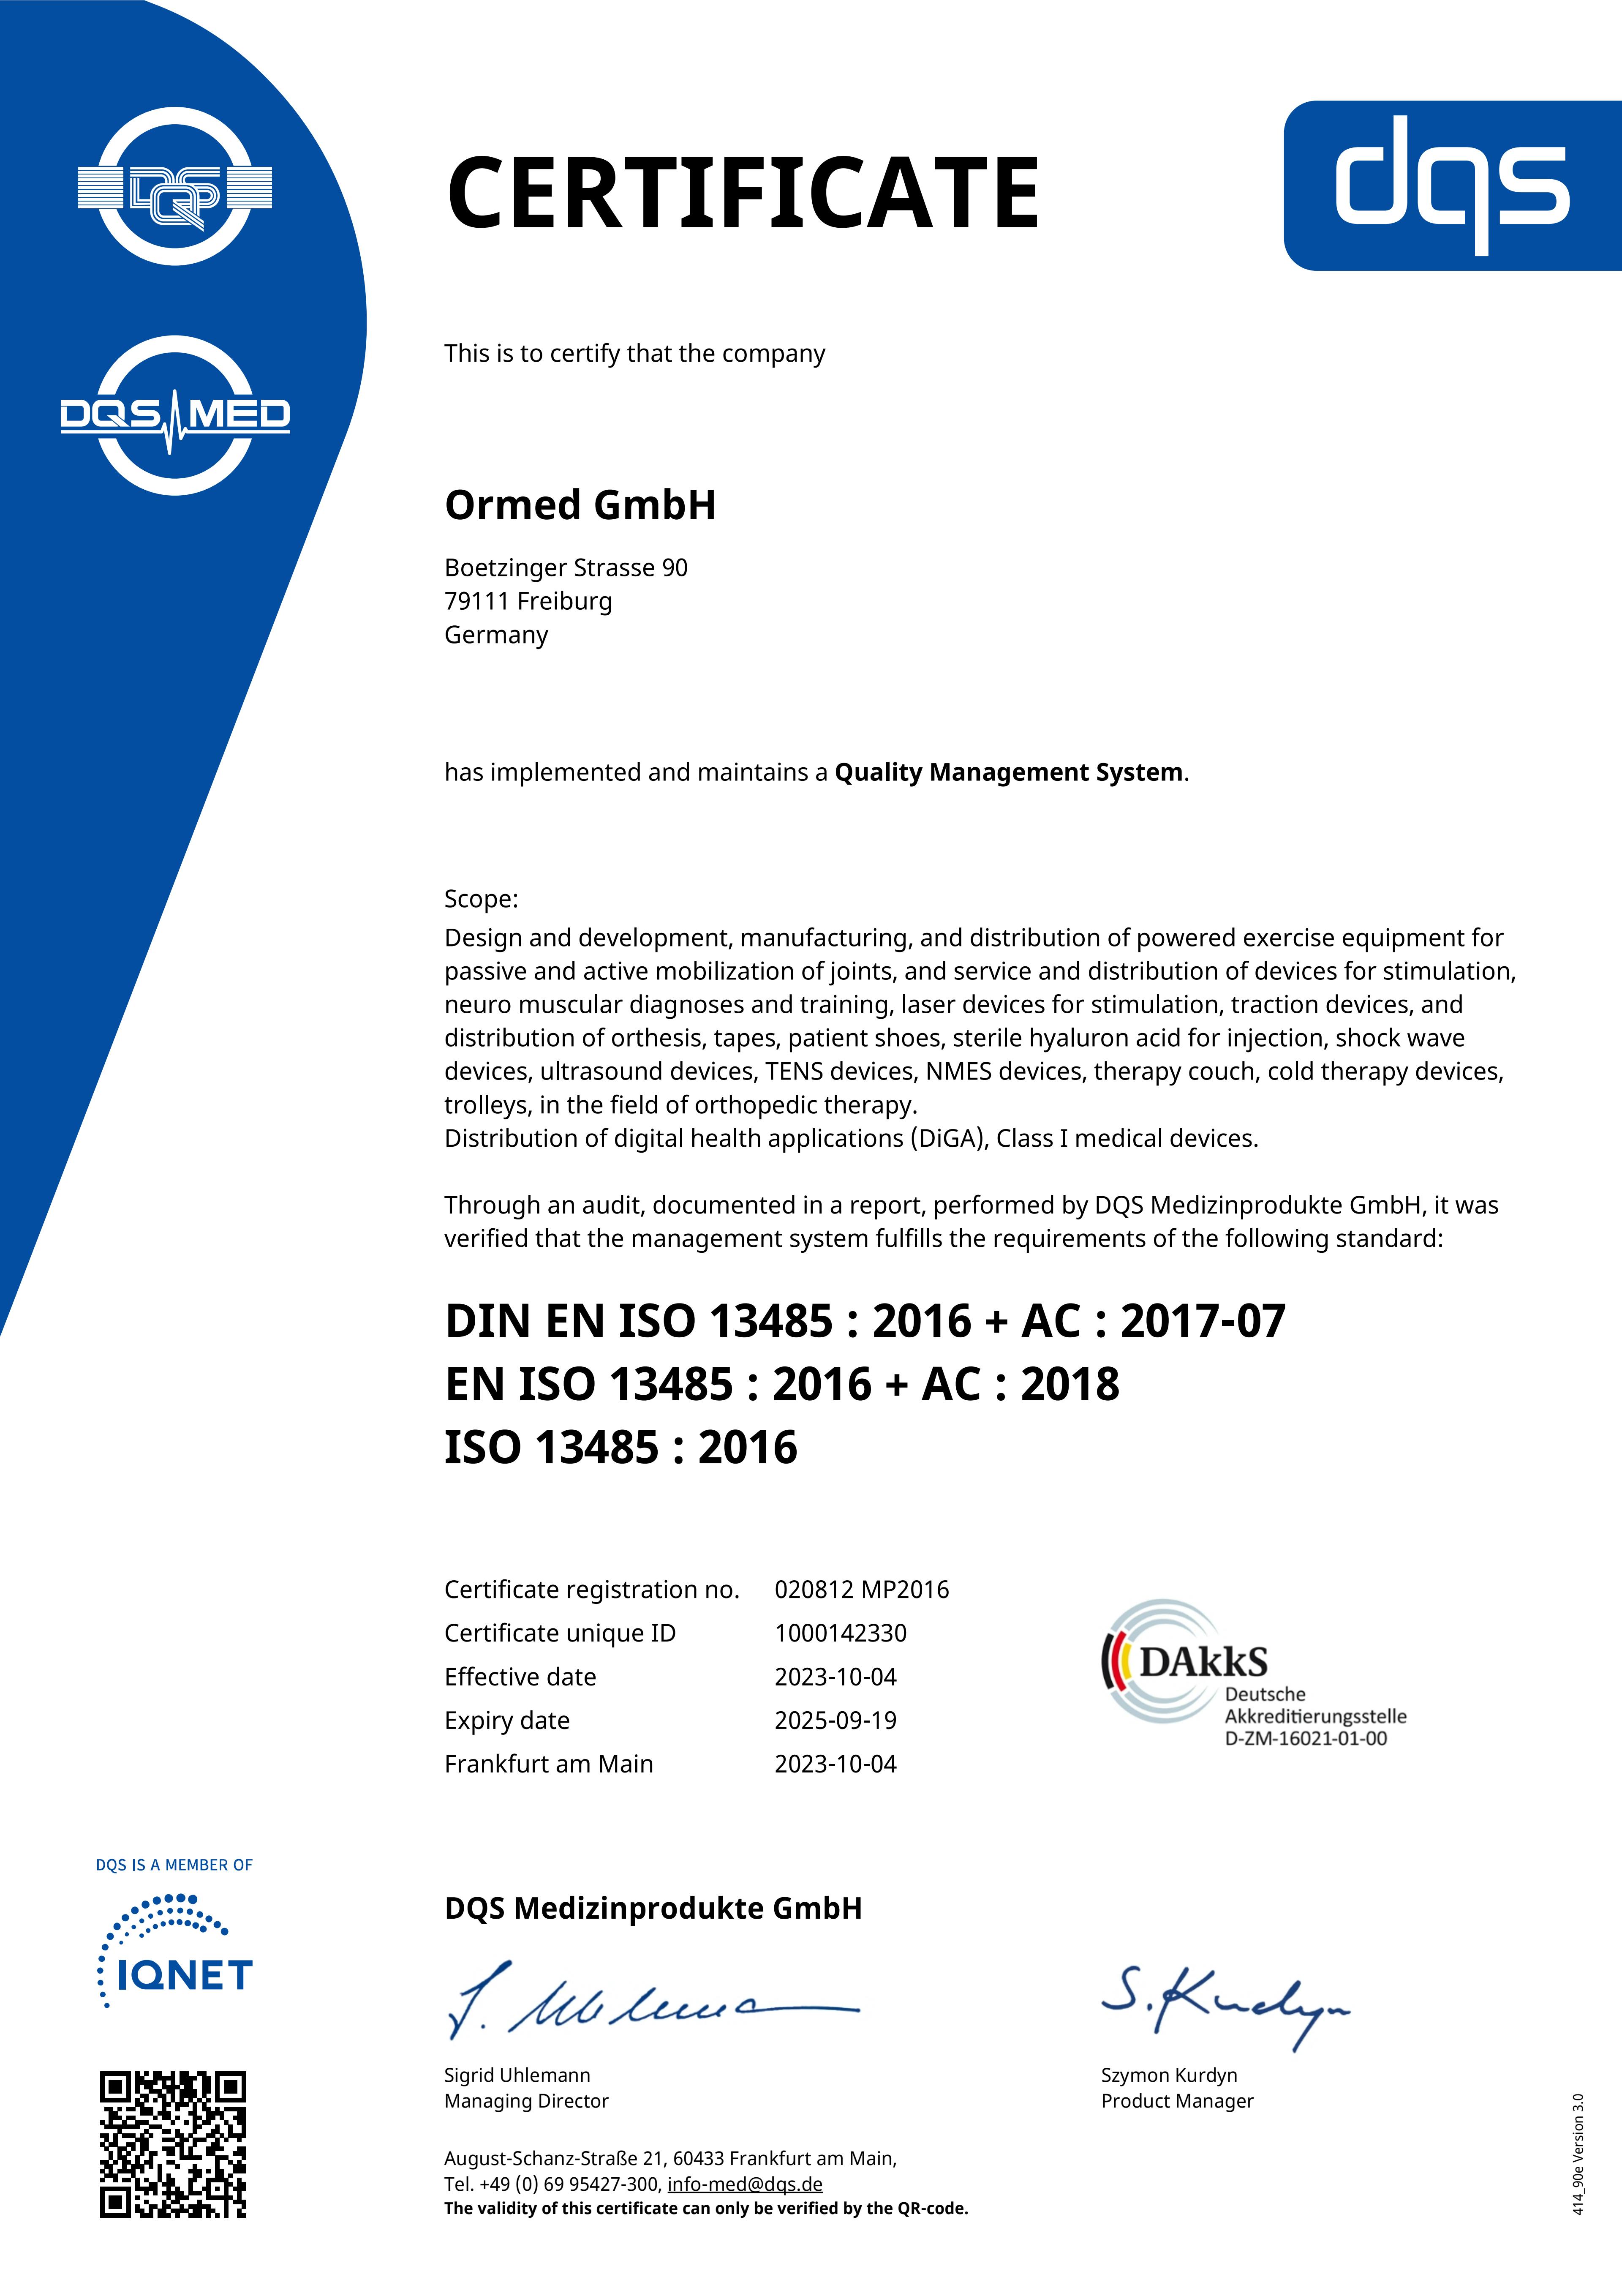 020812 - Ormed GmbH - CERTIFICATE - englisch - 2022-09-20 - MP2016.pdf